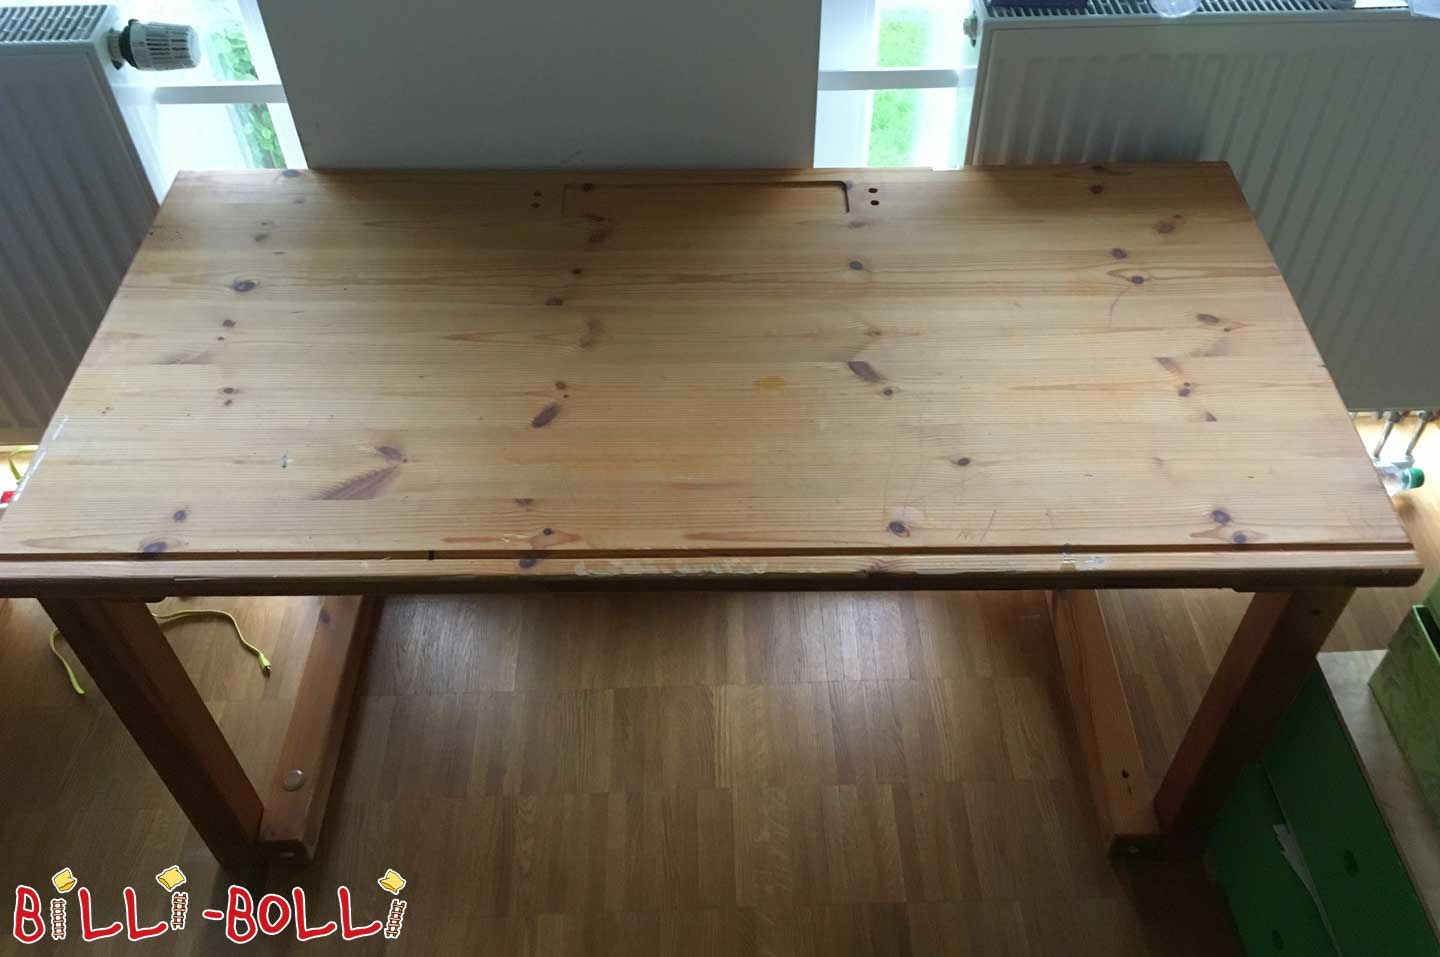 Desk 65 x 123 cm, oiled-waxed pine (Category: second hand kids’ furniture)